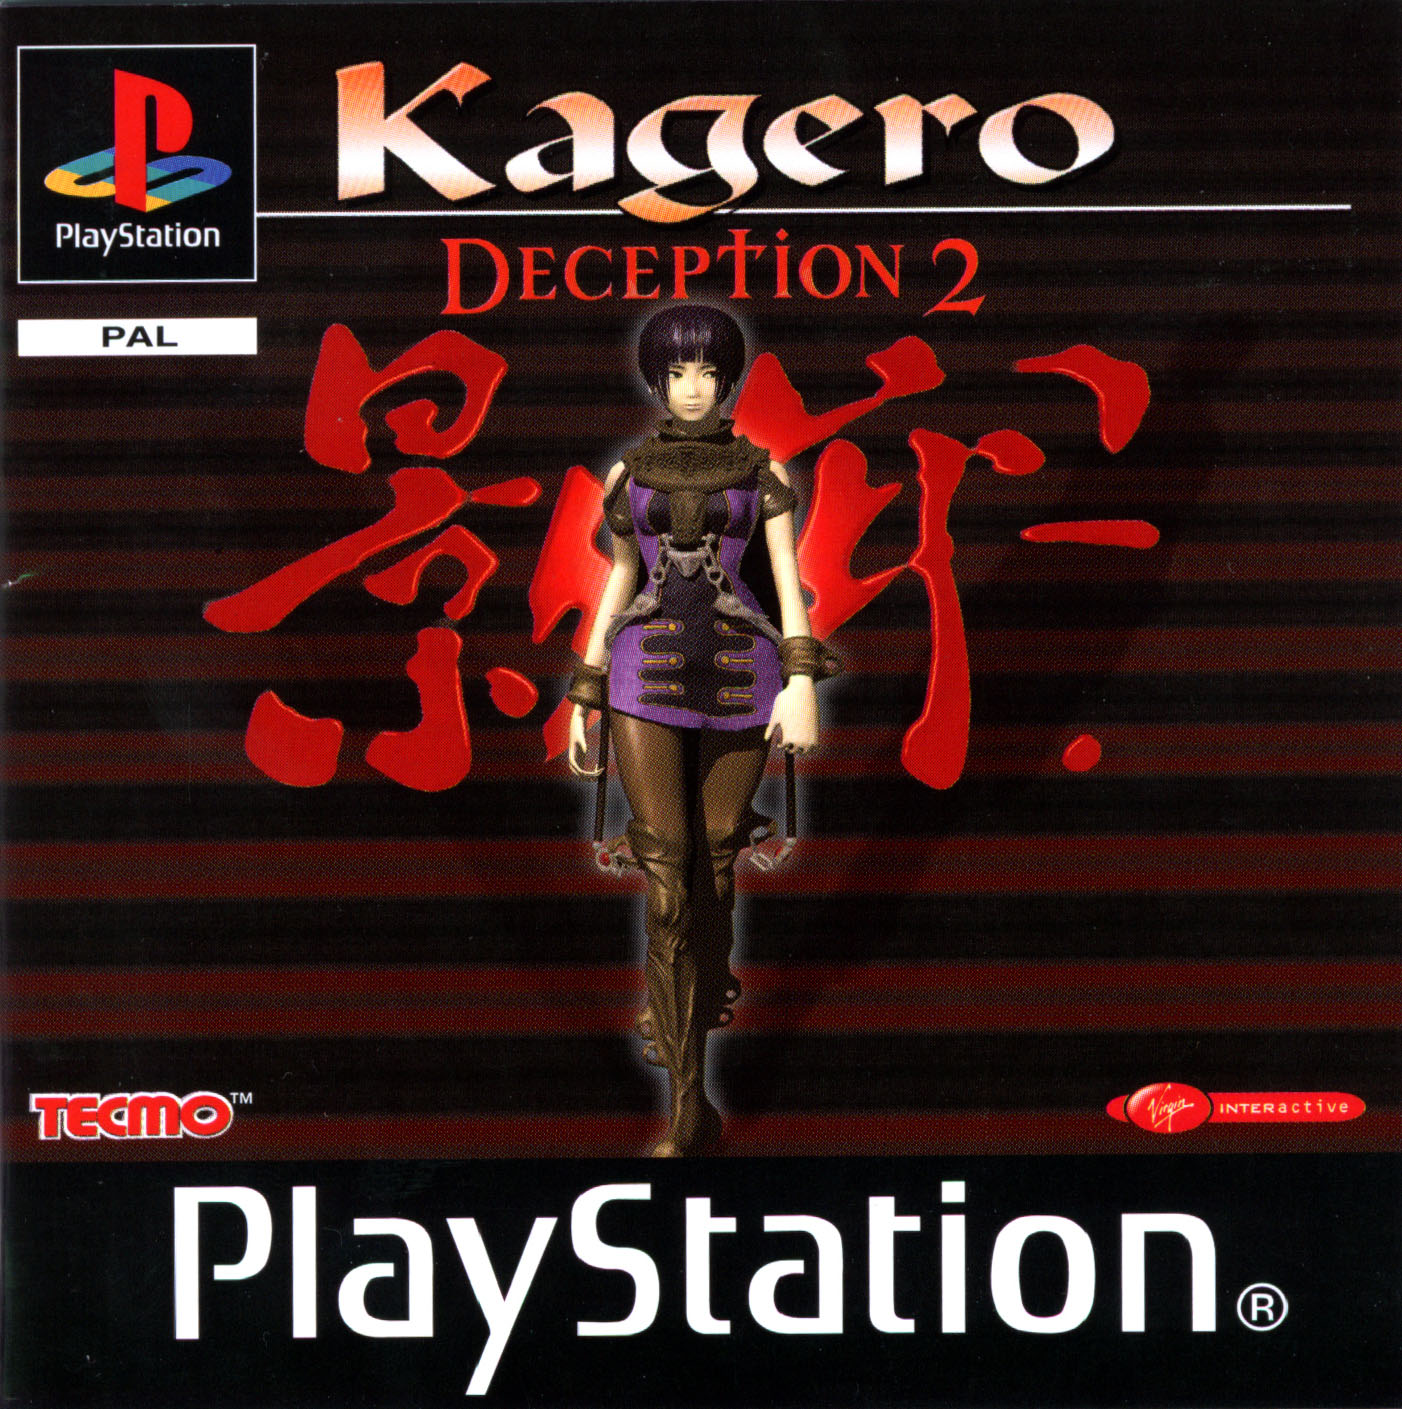 Kagero - Deception II PSX cover